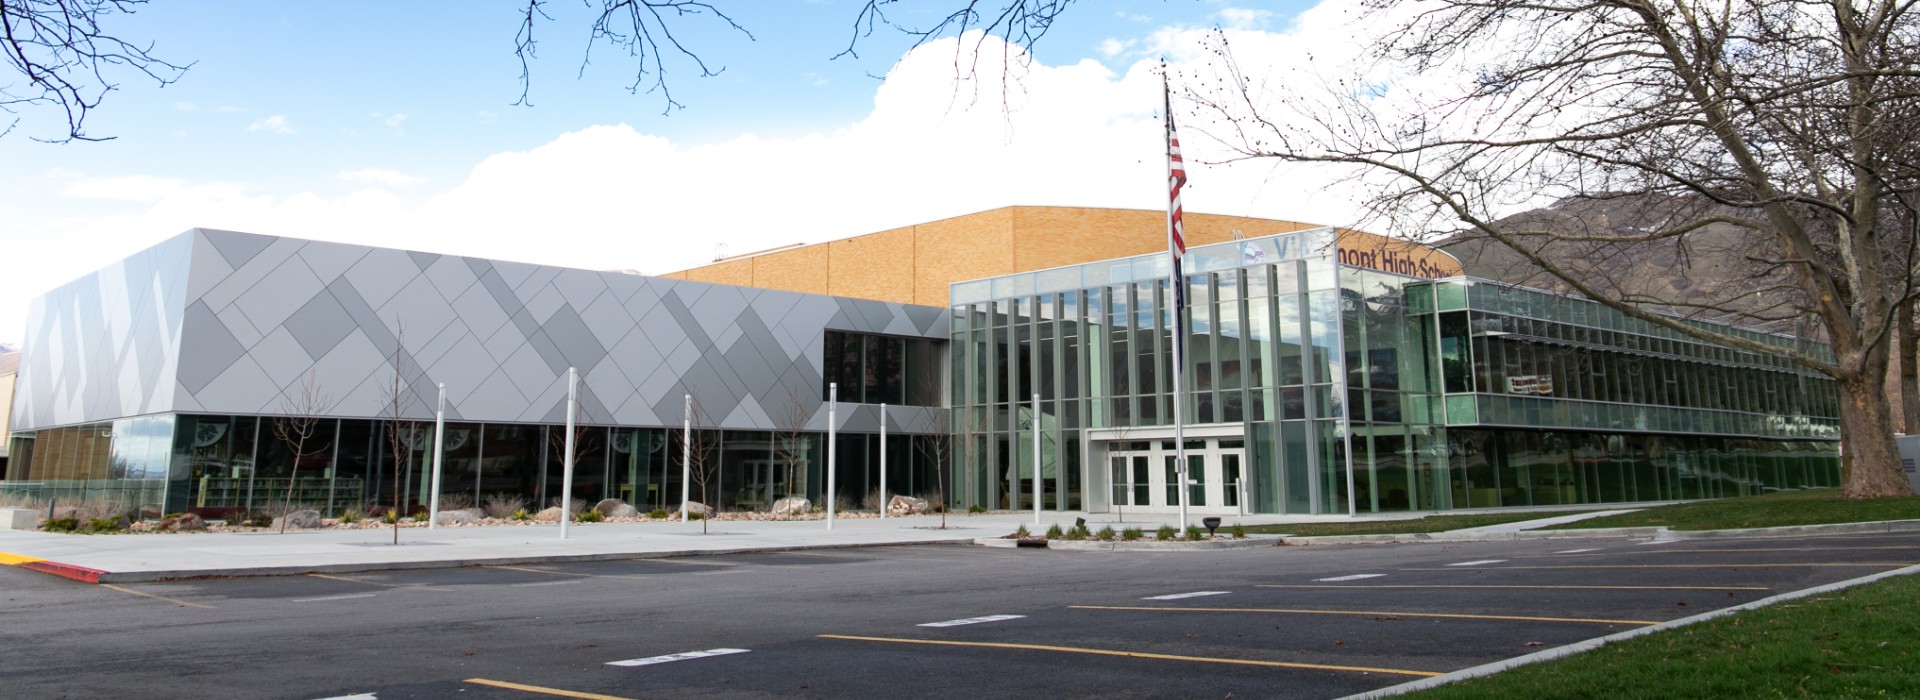 photo of front Viewmont High School